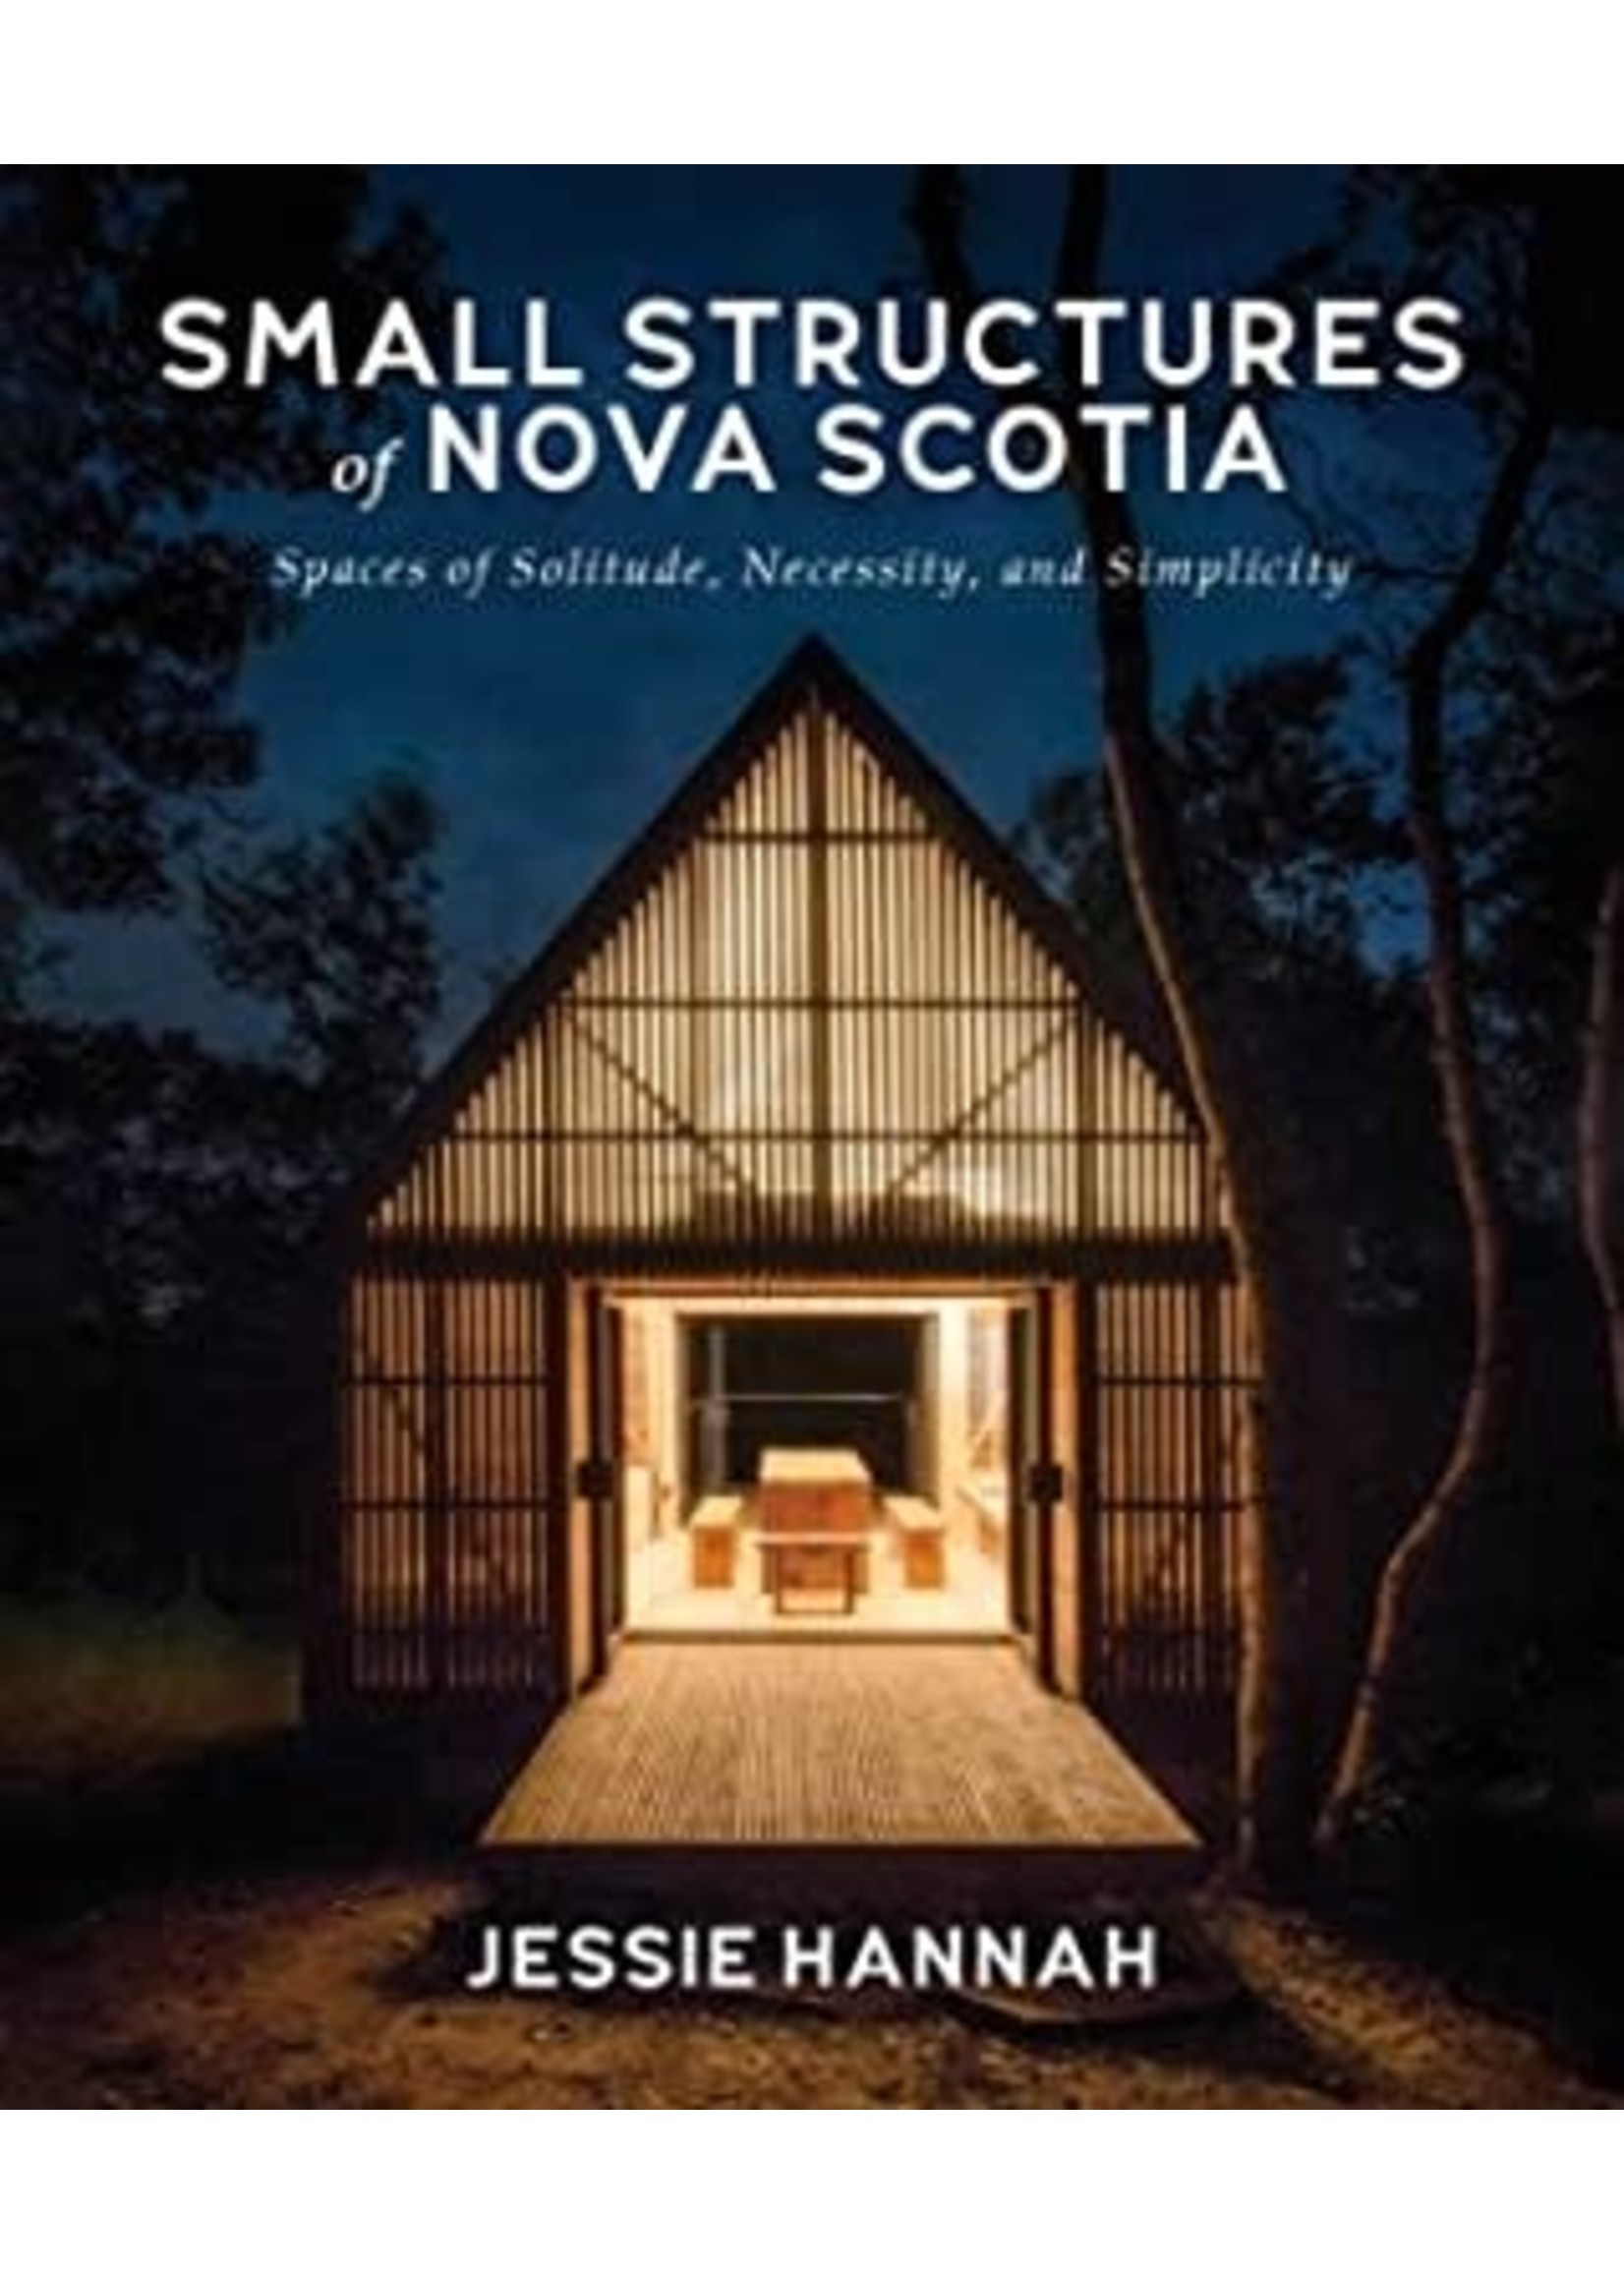 Small Structures of Nova Scotia: Spaces of Solitude, Necessity, and Simplicity by Jessie Hannah